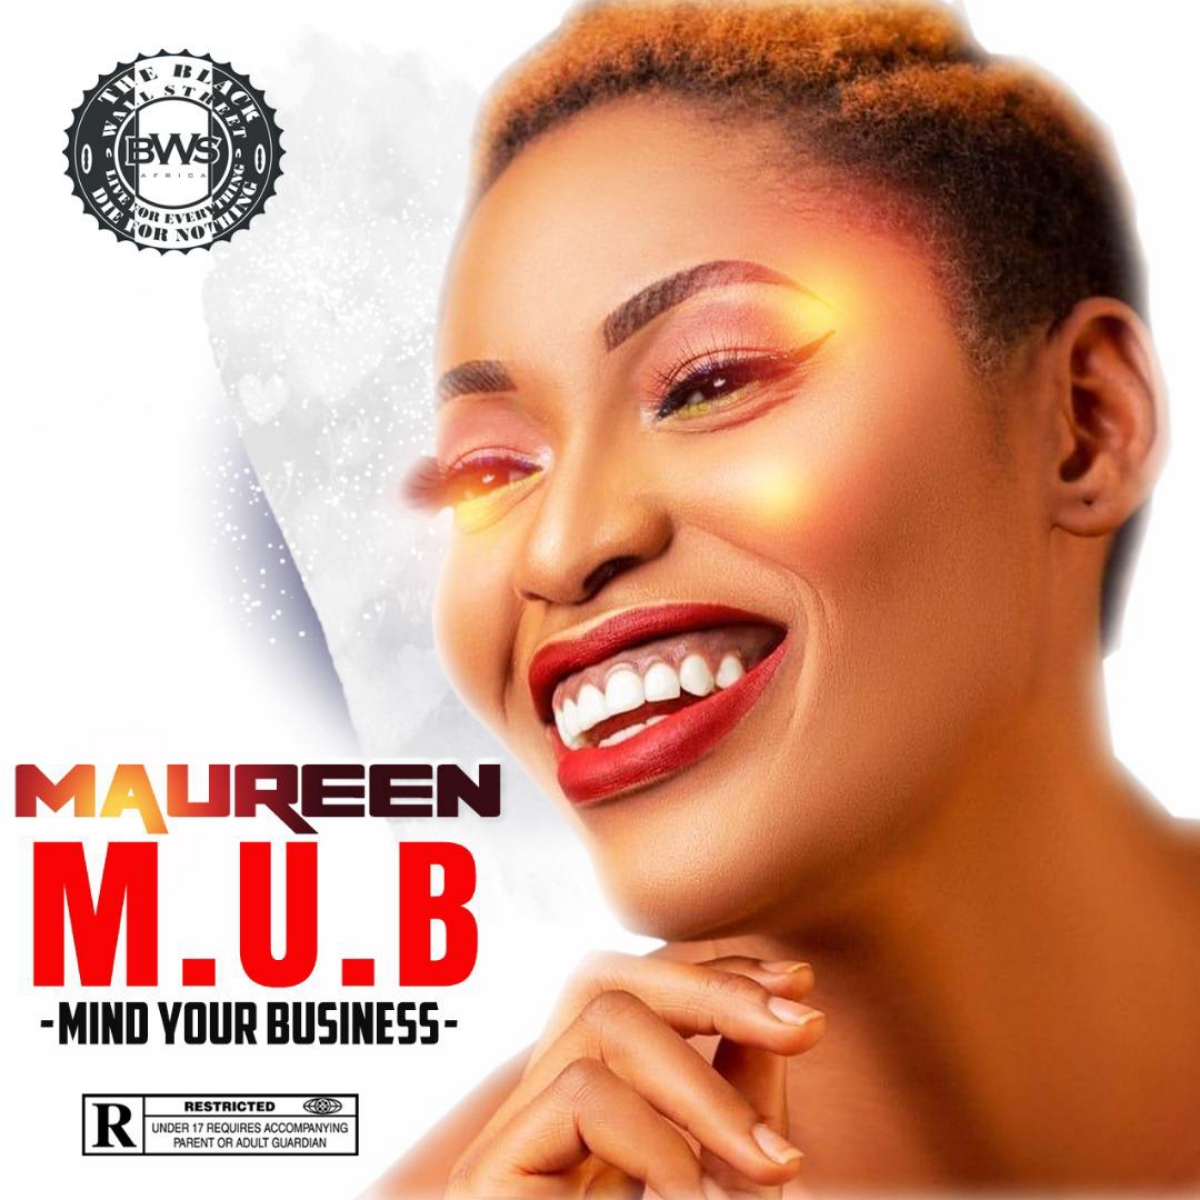 Maureen Mind your business mp3 image